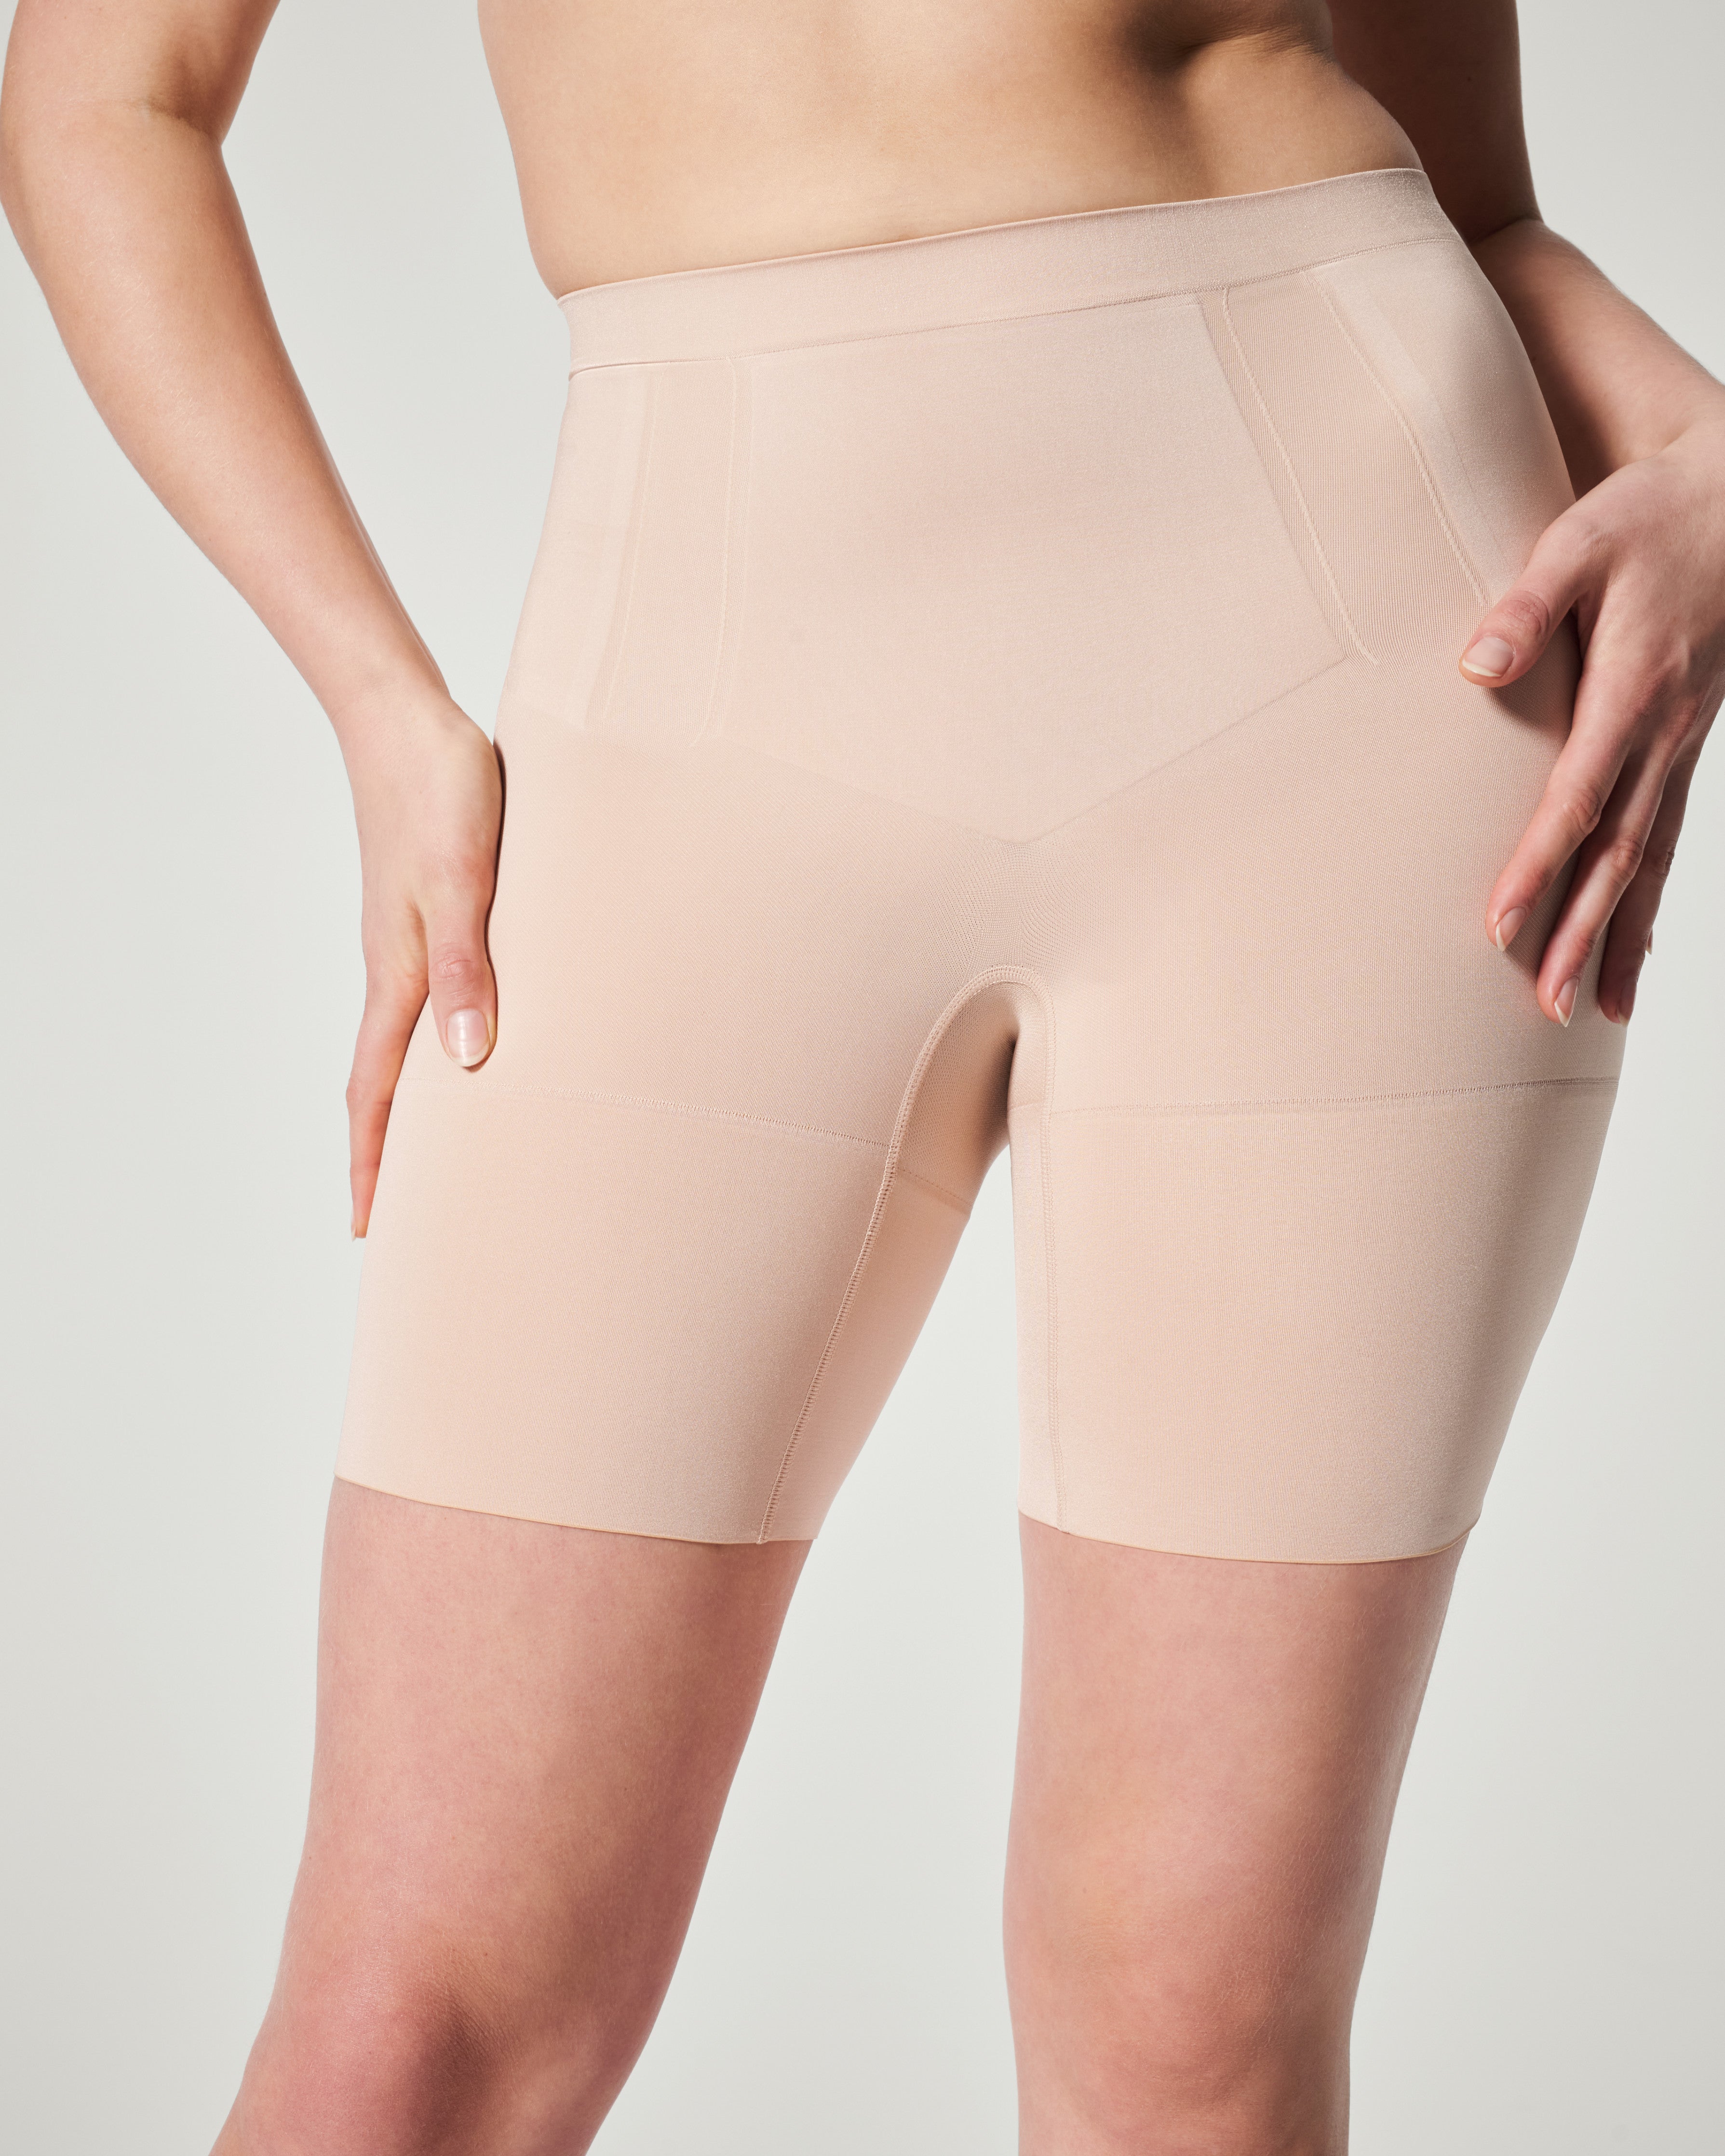 SPANX on X: For multitasking or movement: Introducing Spanx